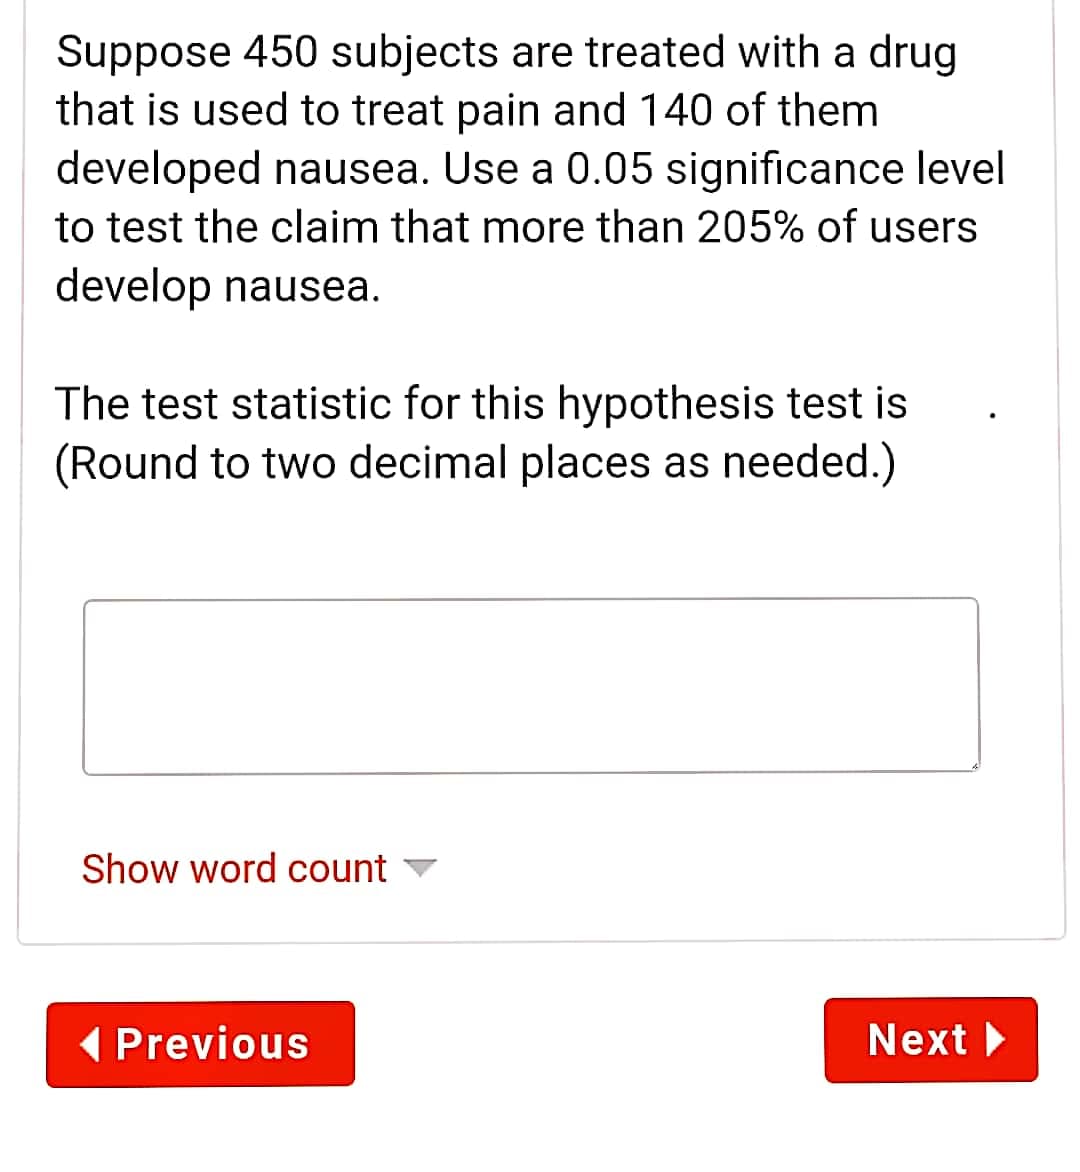 Suppose 450 subjects are treated with a drug
that is used to treat pain and 140 of them
developed nausea. Use a 0.05 significance level
to test the claim that more than 205% of users
develop nausea.
The test statistic for this hypothesis test is
(Round to two decimal places as needed.)
Show word count
( Previous
Next
